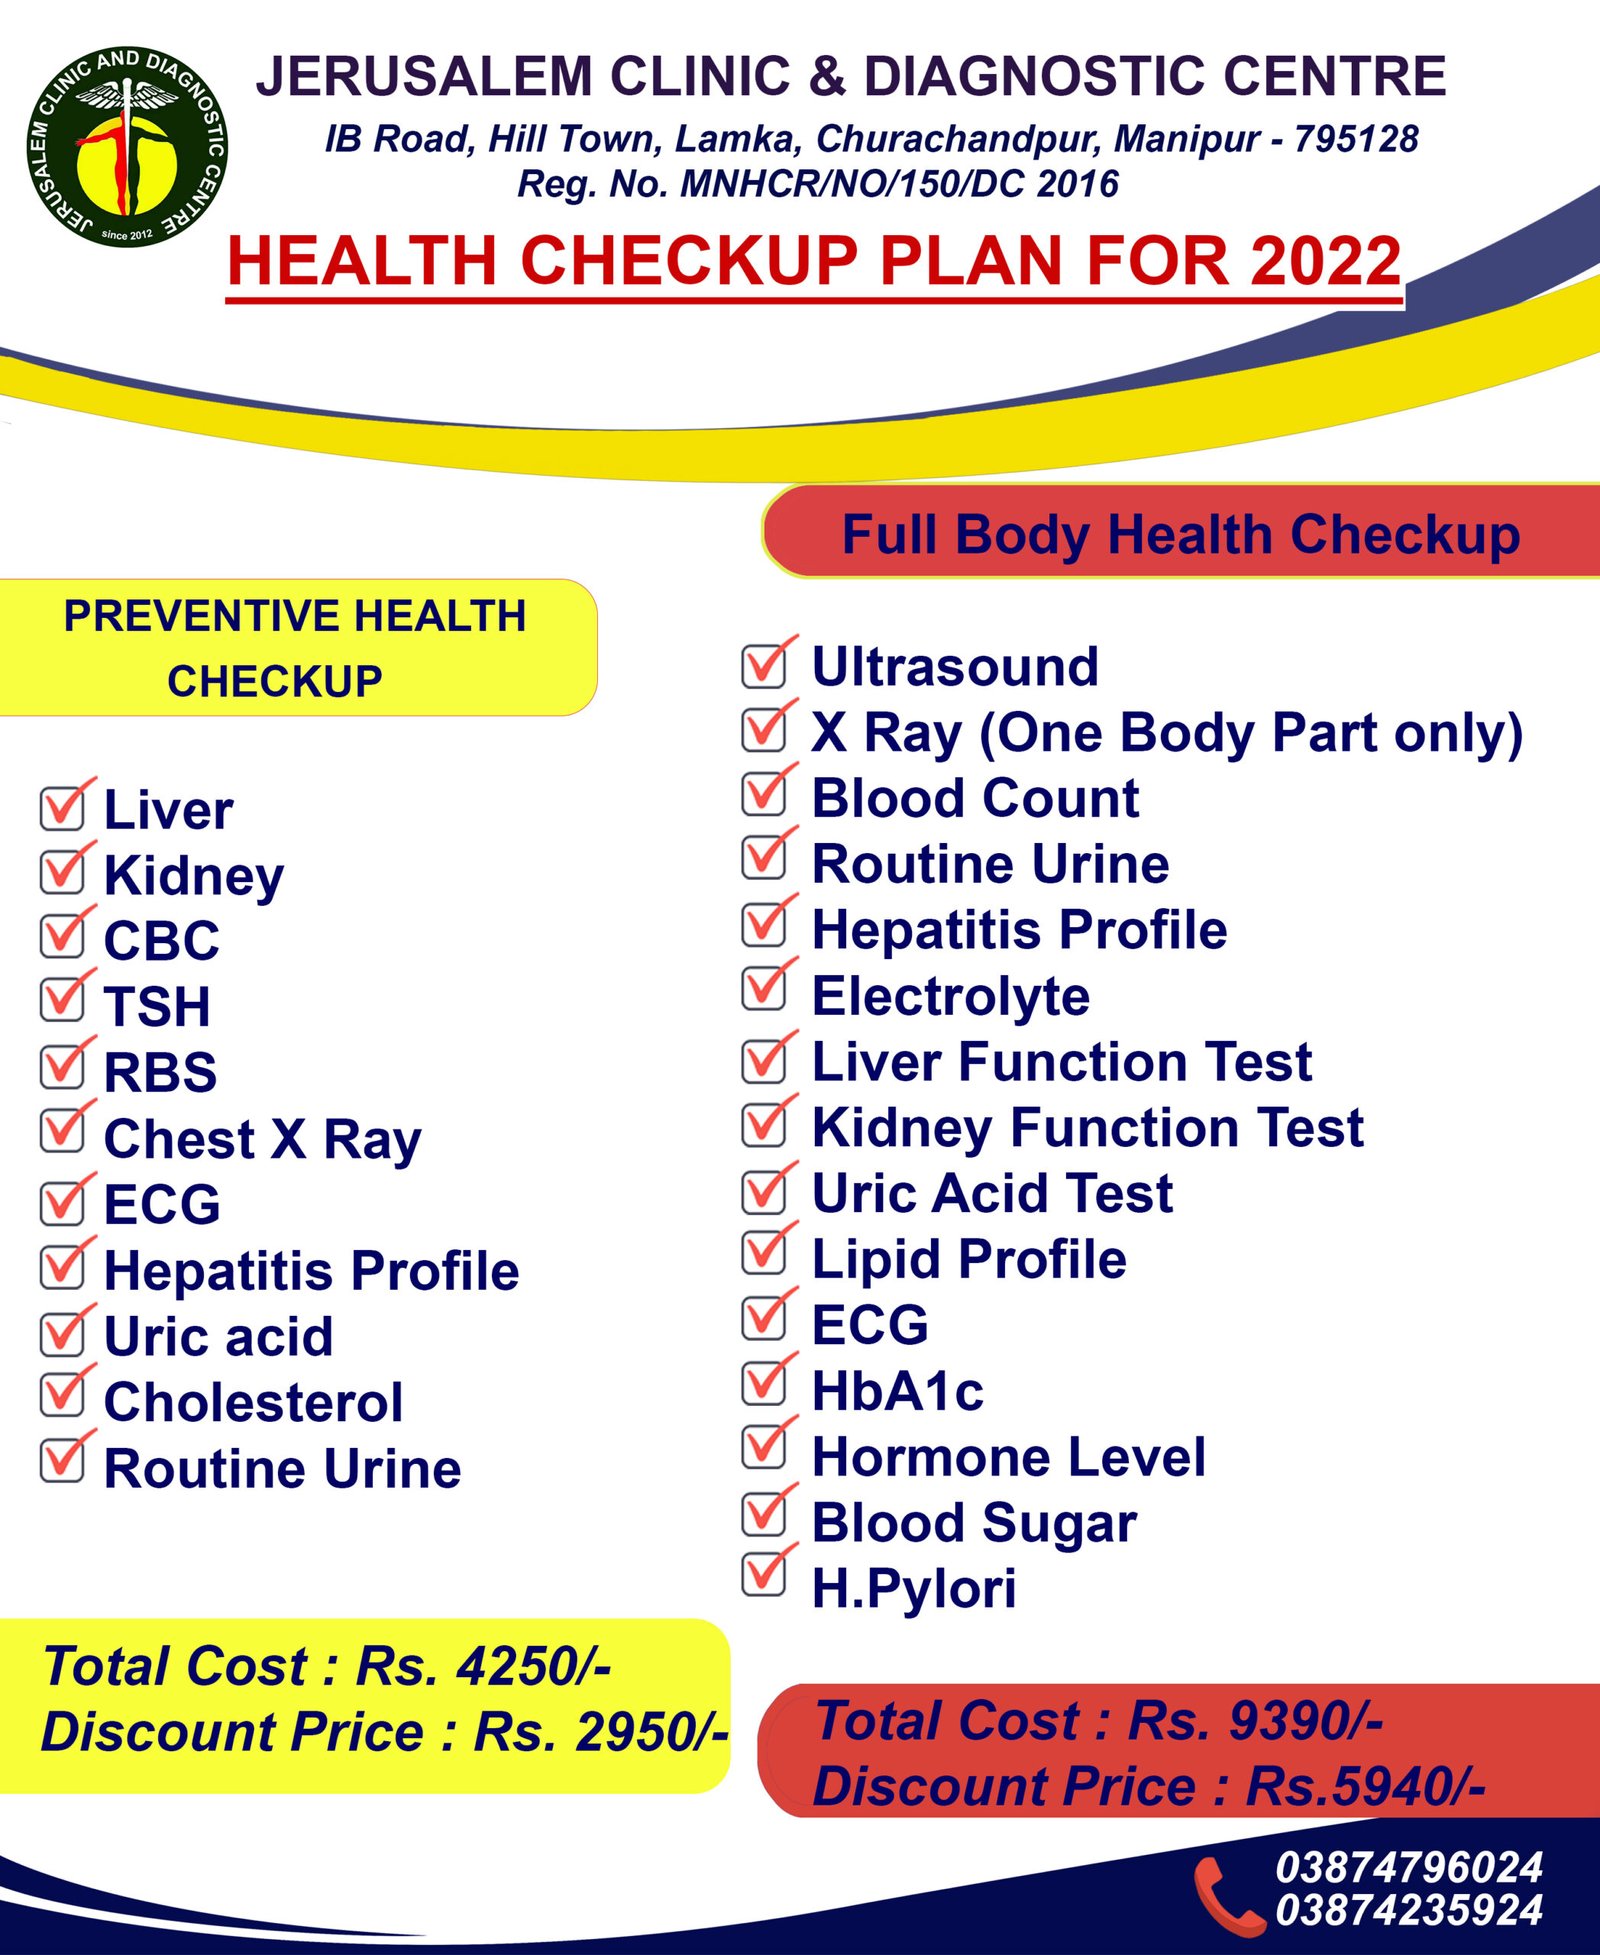 You are currently viewing Health Checkup Plan for 2022 @Jerusalem Clinic & Diagnostic Centre